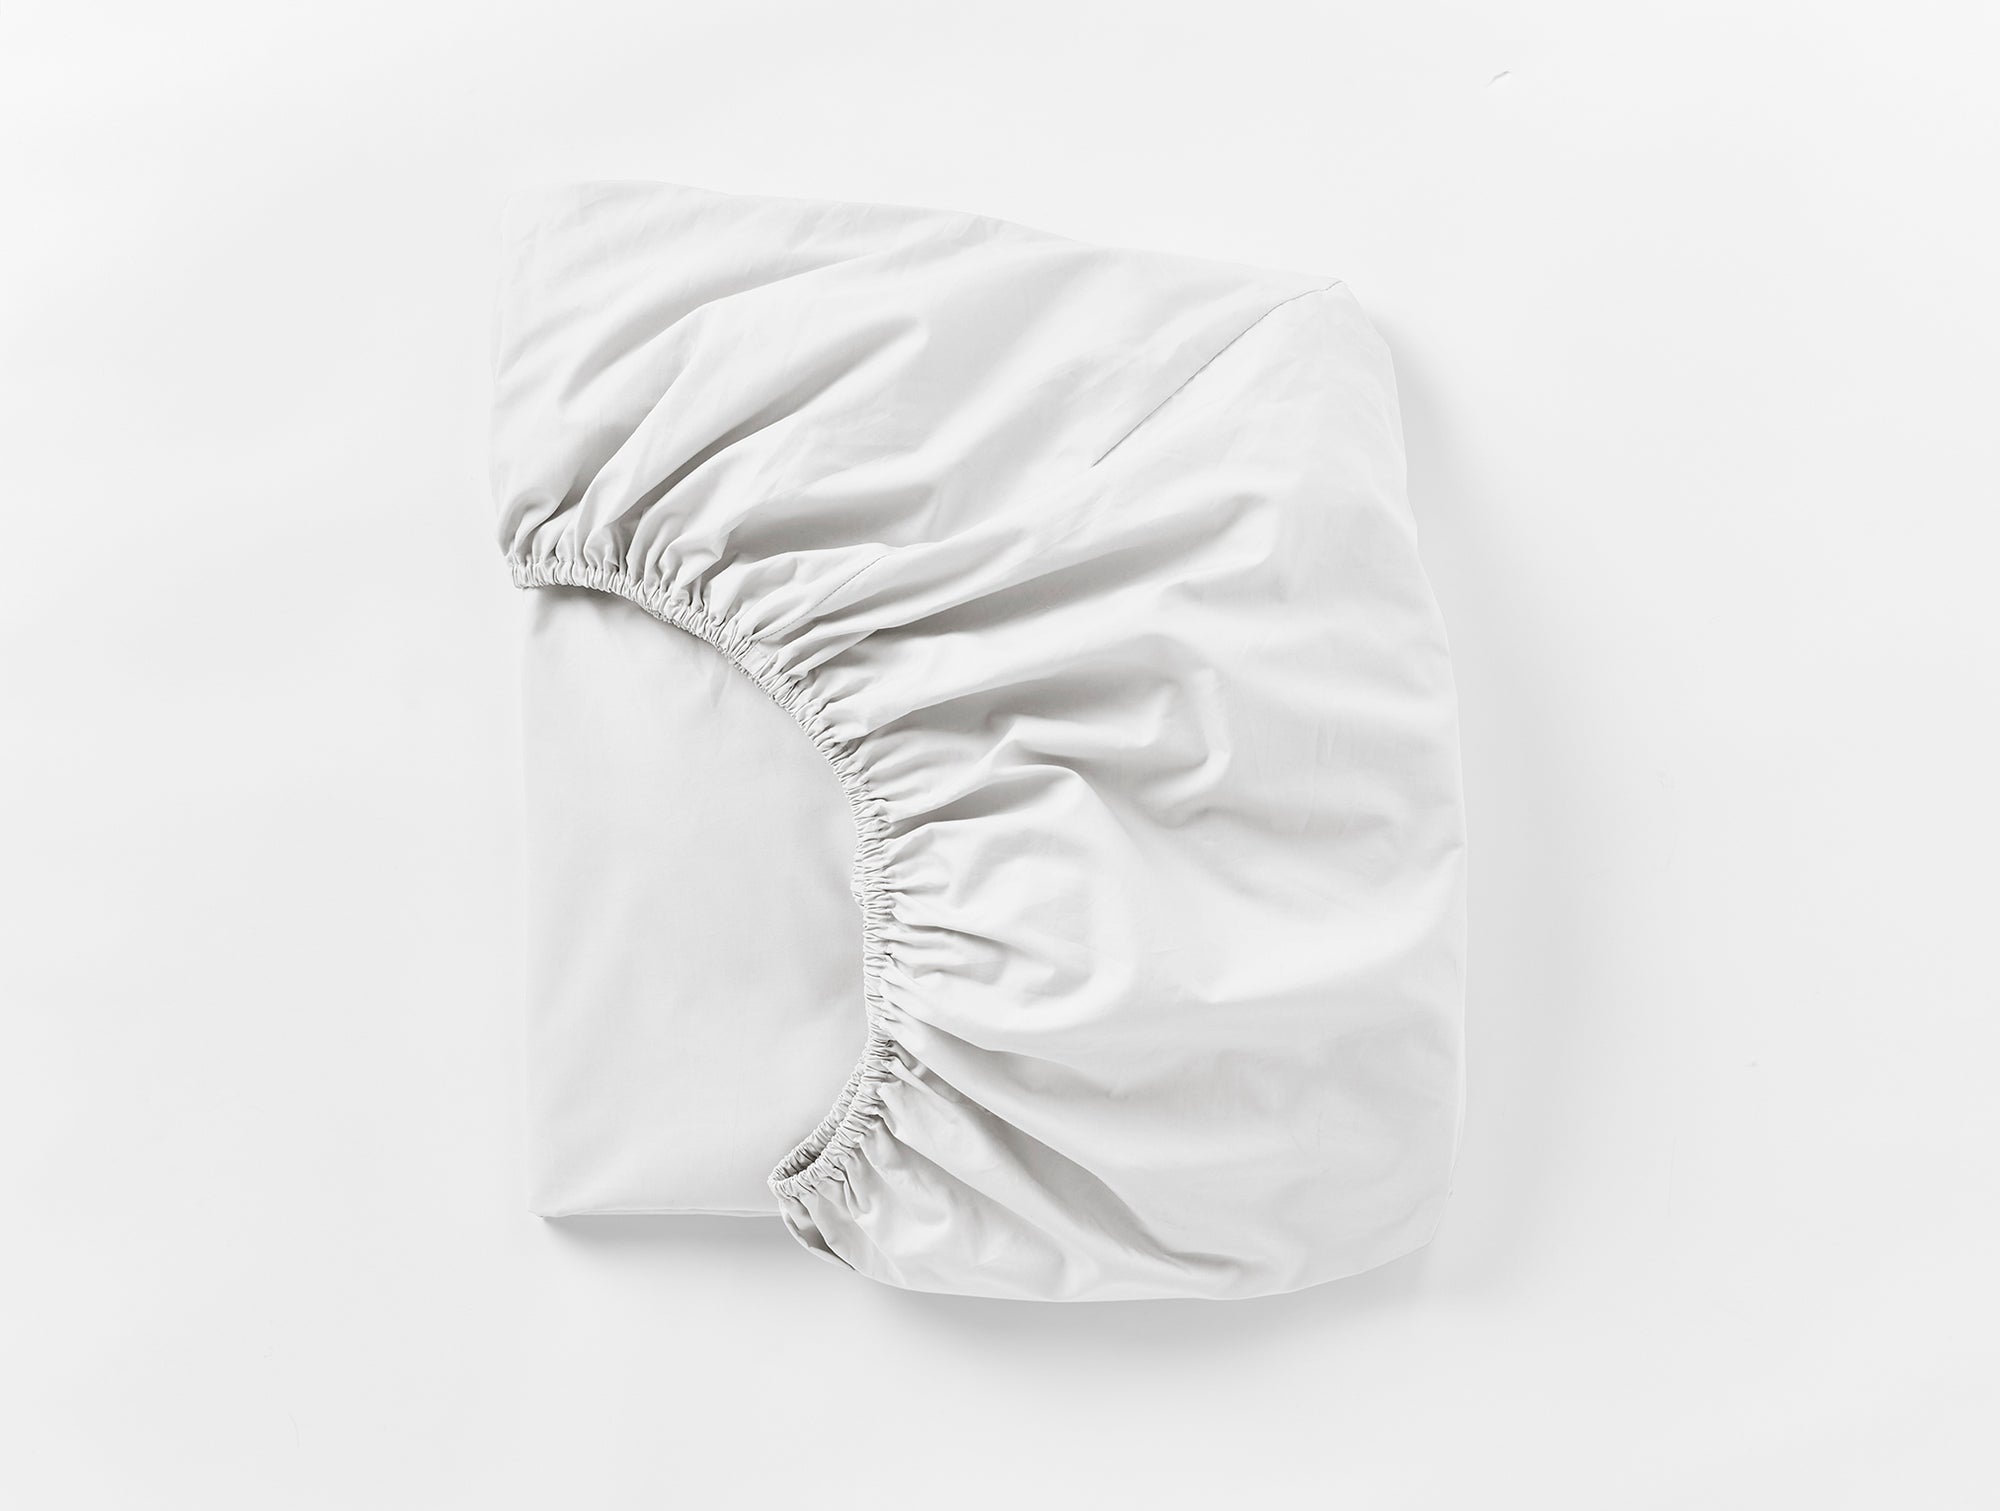 300 TC Organic Percale Fitted Sheets in Twin XL